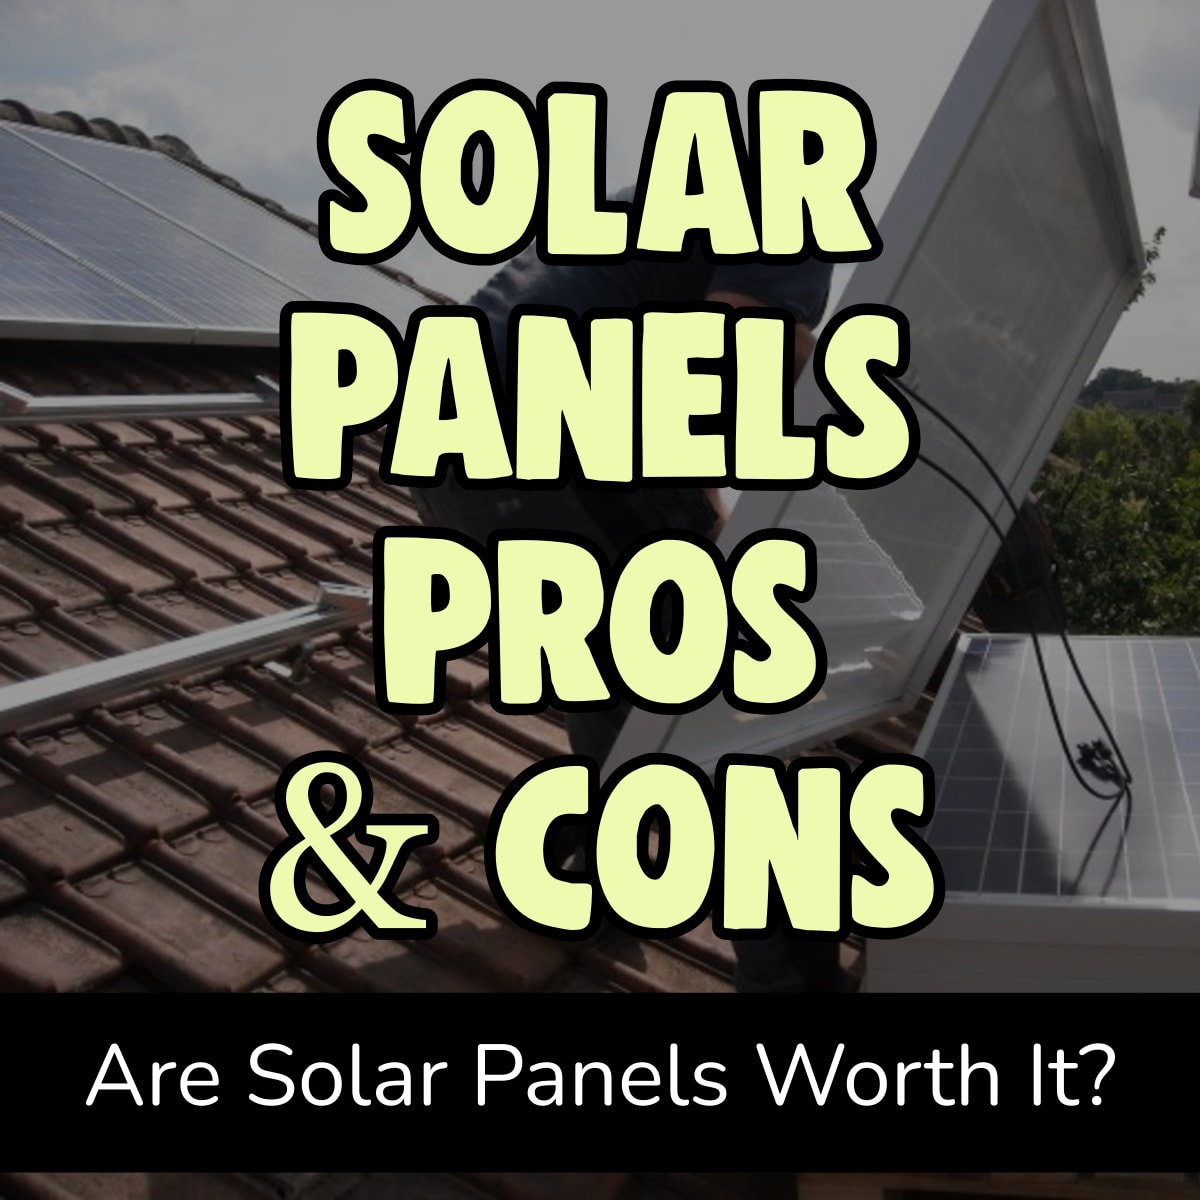 Solar Panels Pros and Cons - Are Solar Panels Worth the Money?